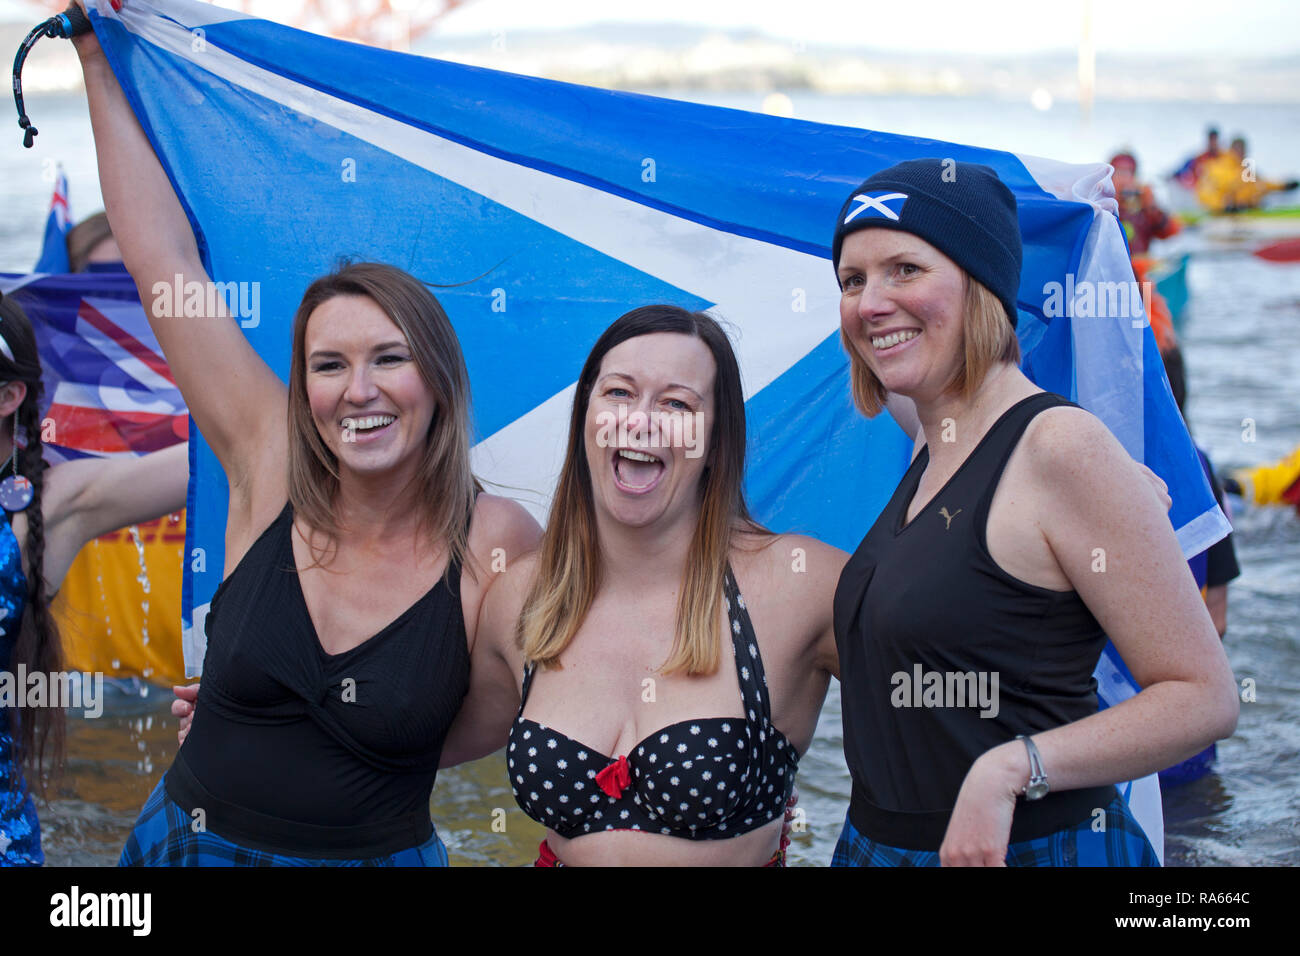 South Queensferry, Edinburgh, Scotland UK. 01 January 2019. Queensferry New Year Loony Dook, the annual dip in the Firth of Forth in the shadow of the world-famous Forth Rail Bridge. Takes place on the third day of the Edinburgh Hogmany New Year celebrations. Maximum capacity crowds Stock Photo